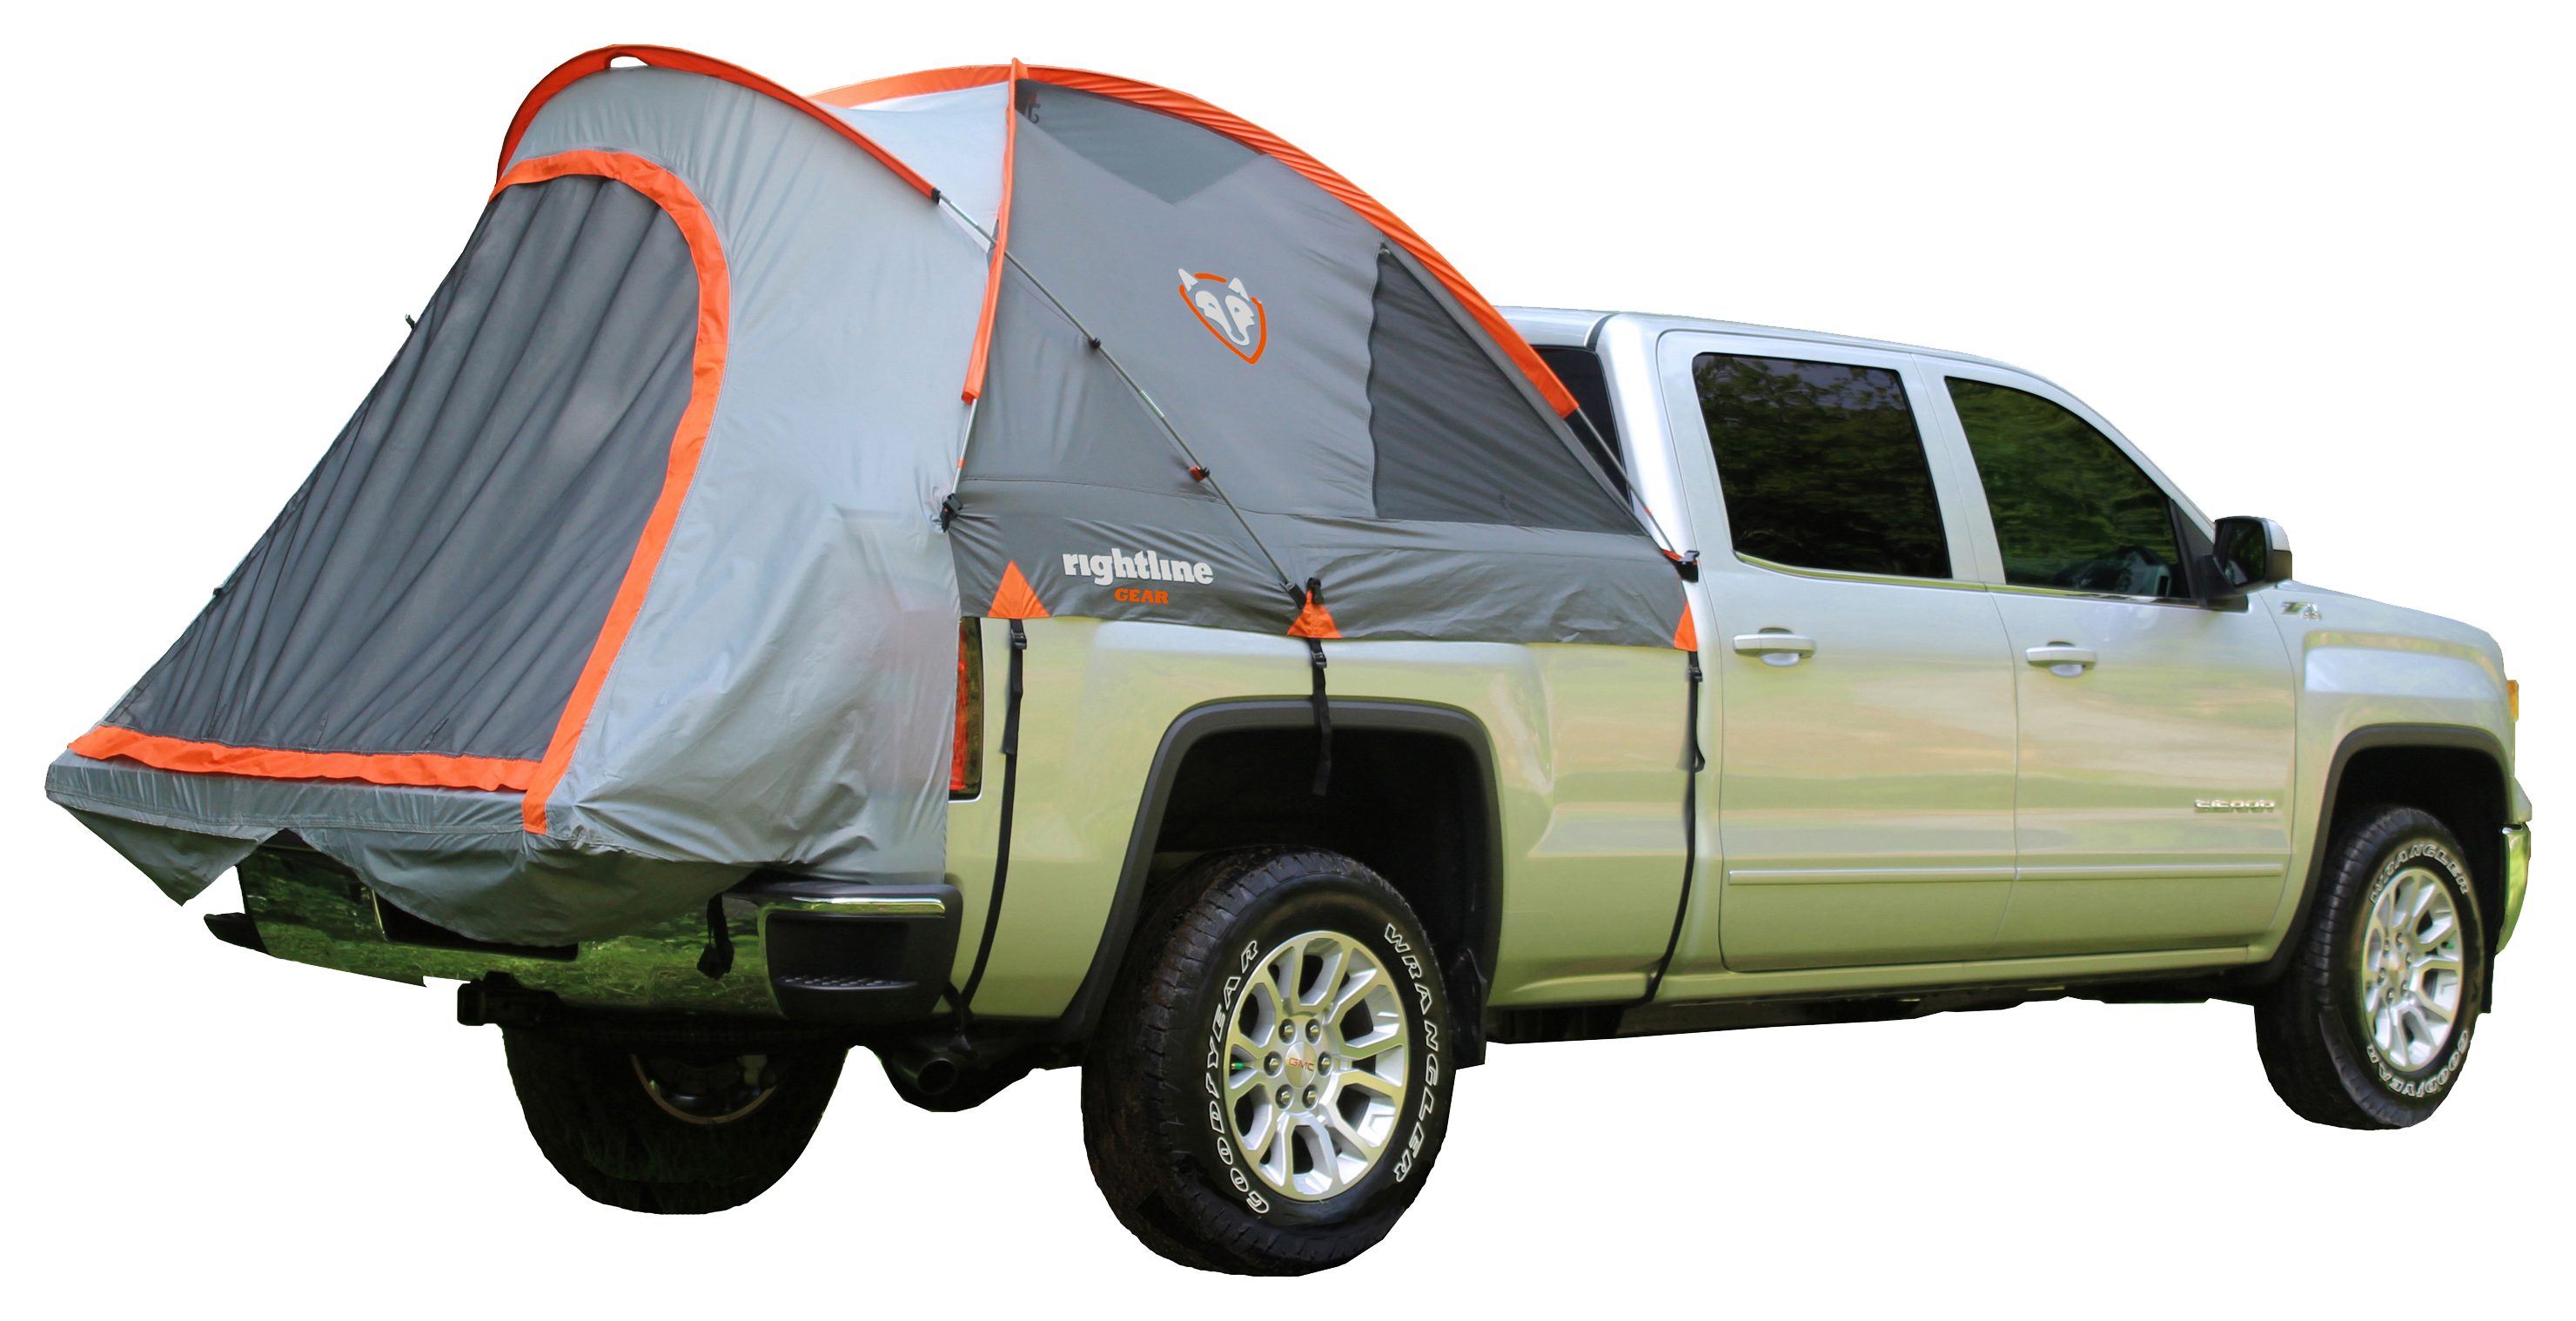 Rightline Gear 2-Person Truck Tent - 5.5' Full-Size Short Bed